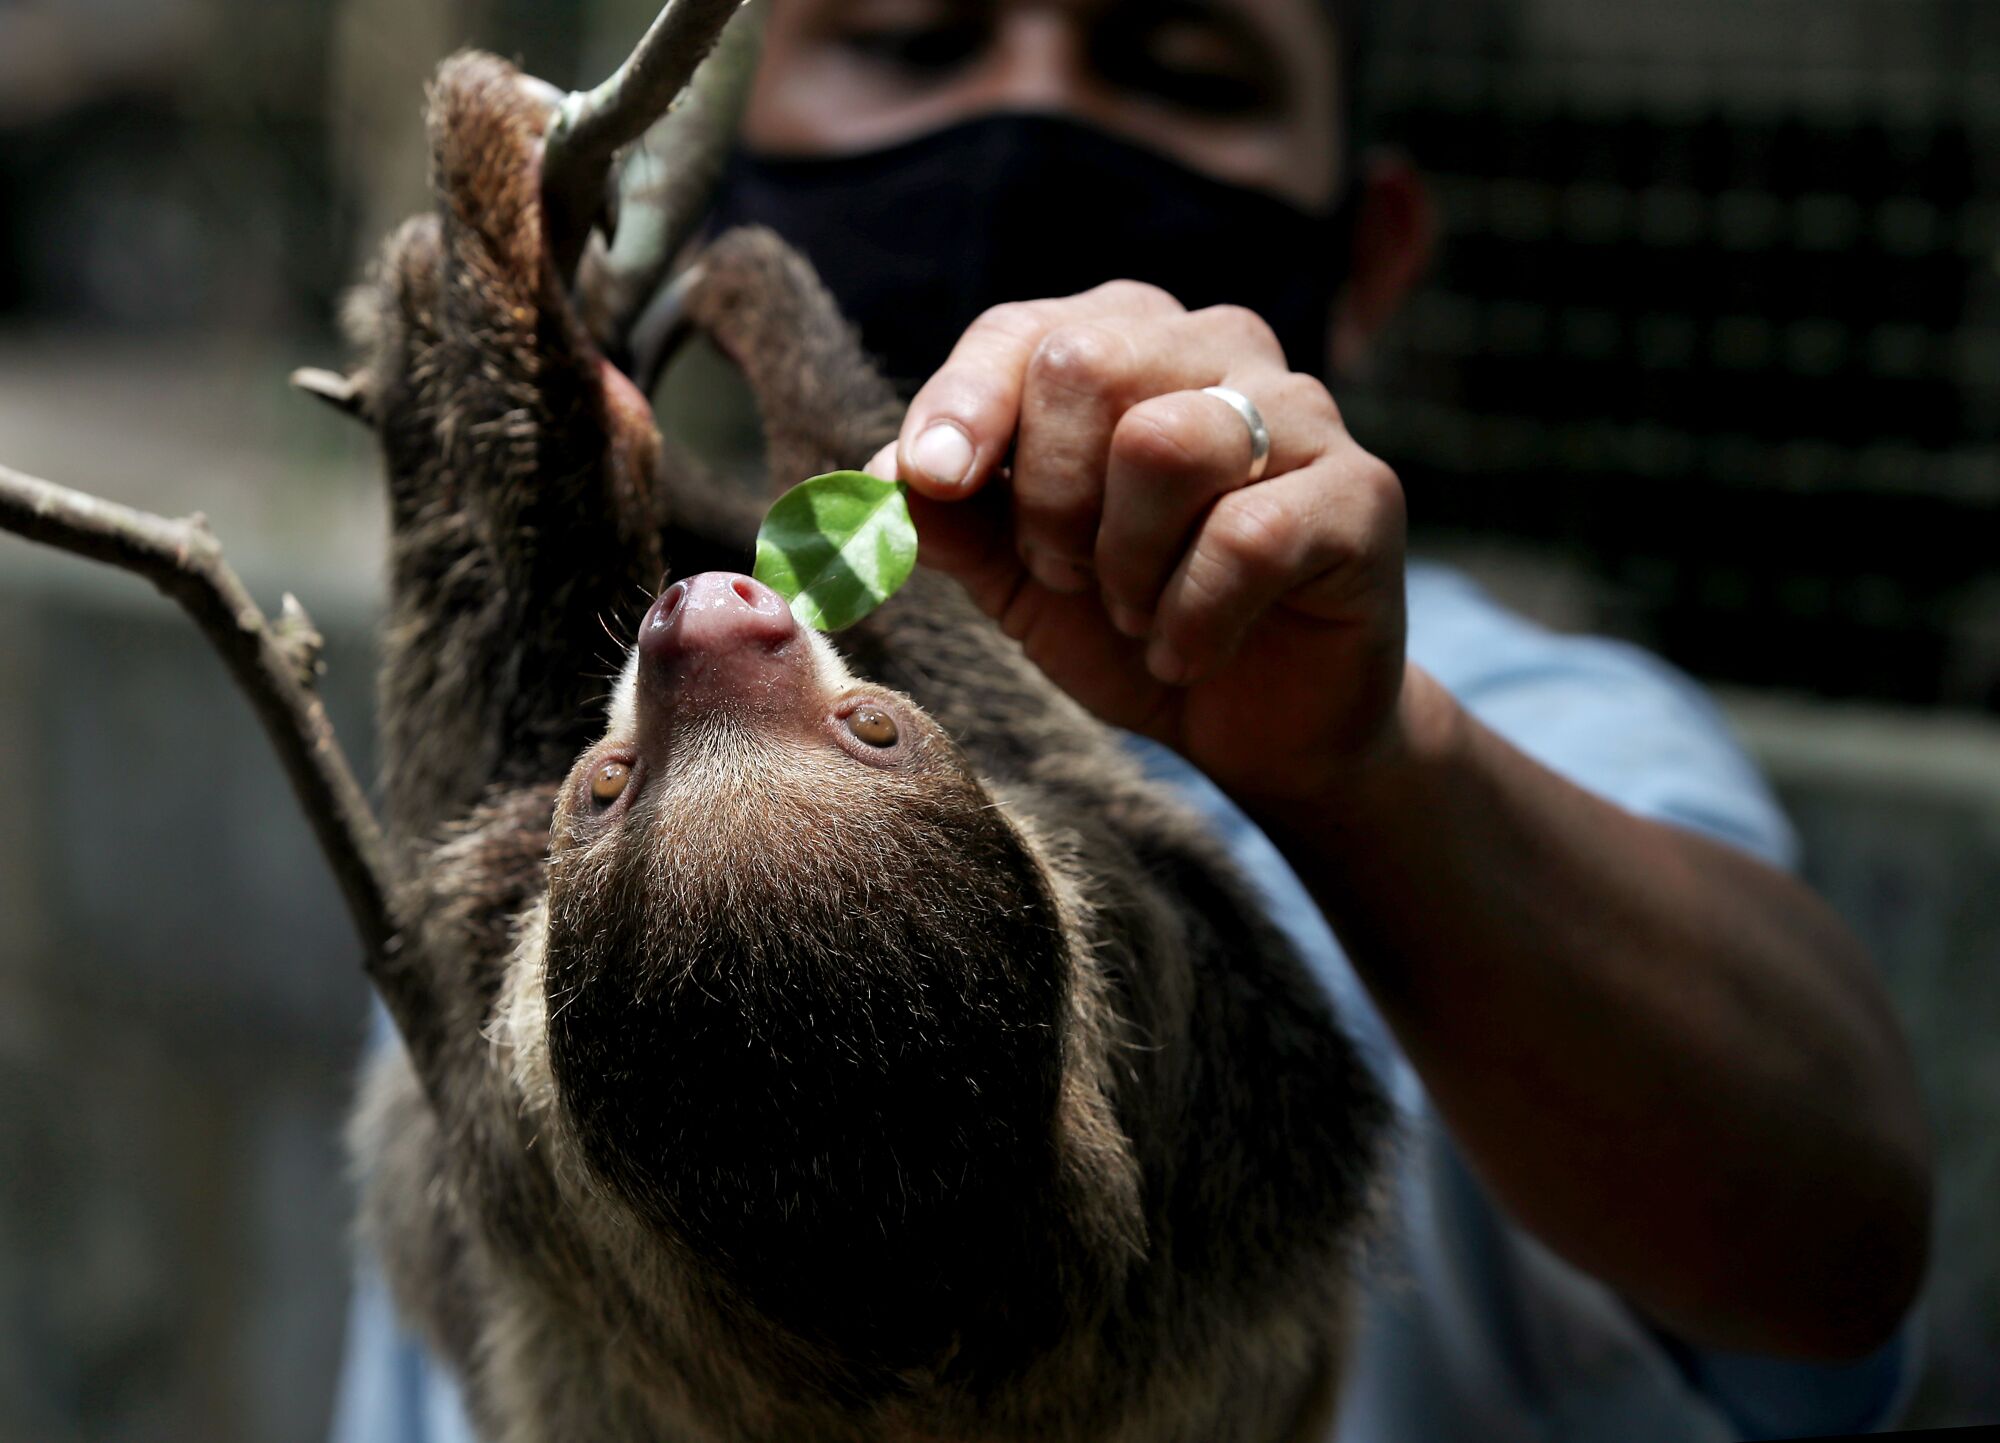 A person feeds a leaf to a sloth hanging upside down from a branch  